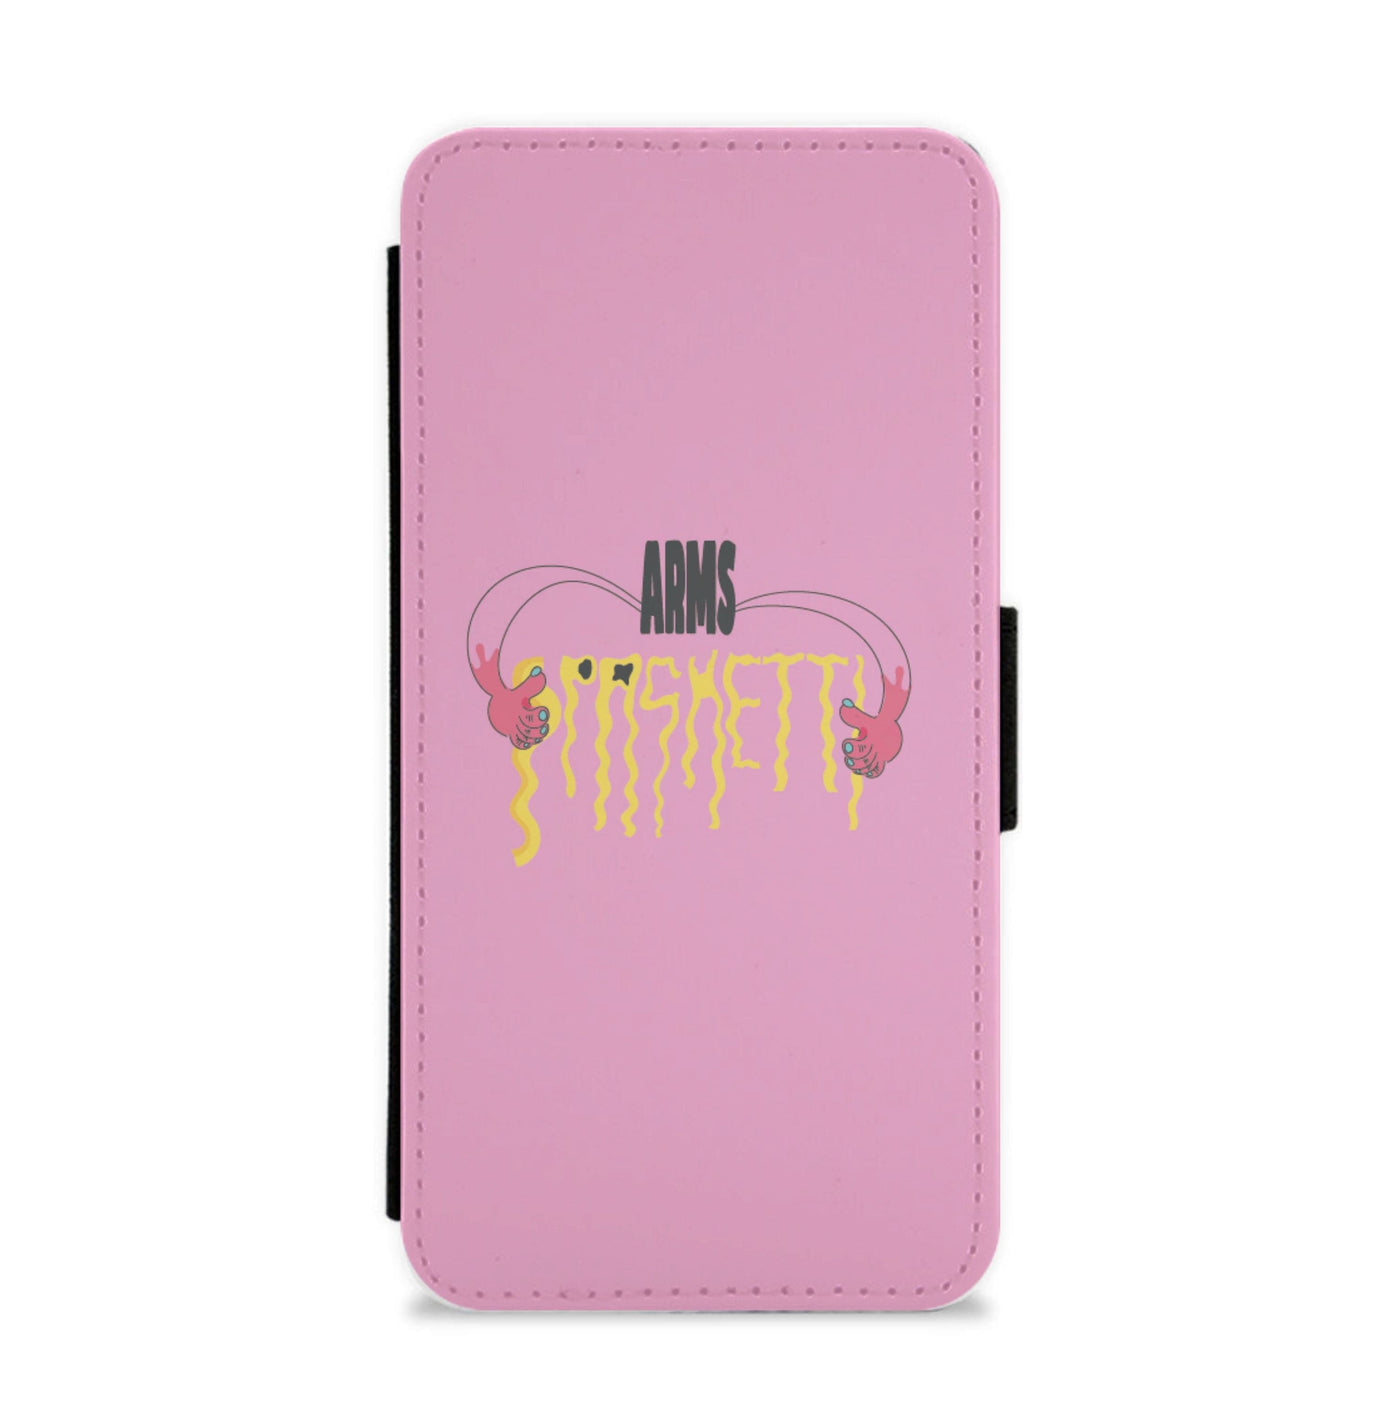 Arms Spaghetti - Pink Flip / Wallet Phone Case